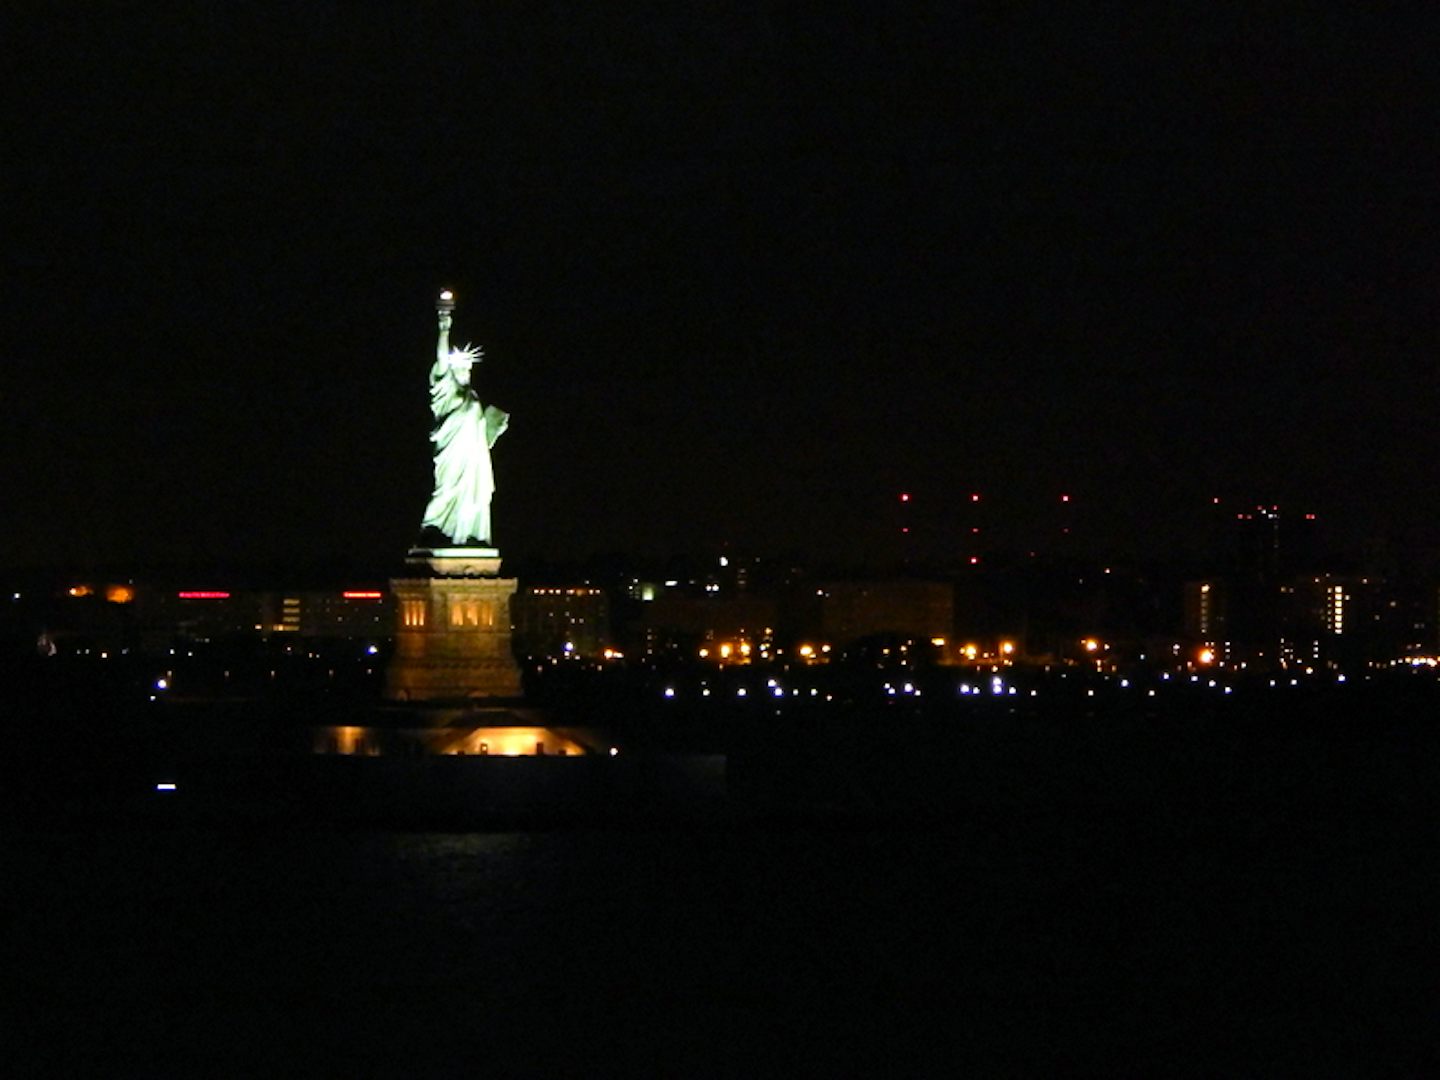 Returning to NYC--passing Statue of Liberty